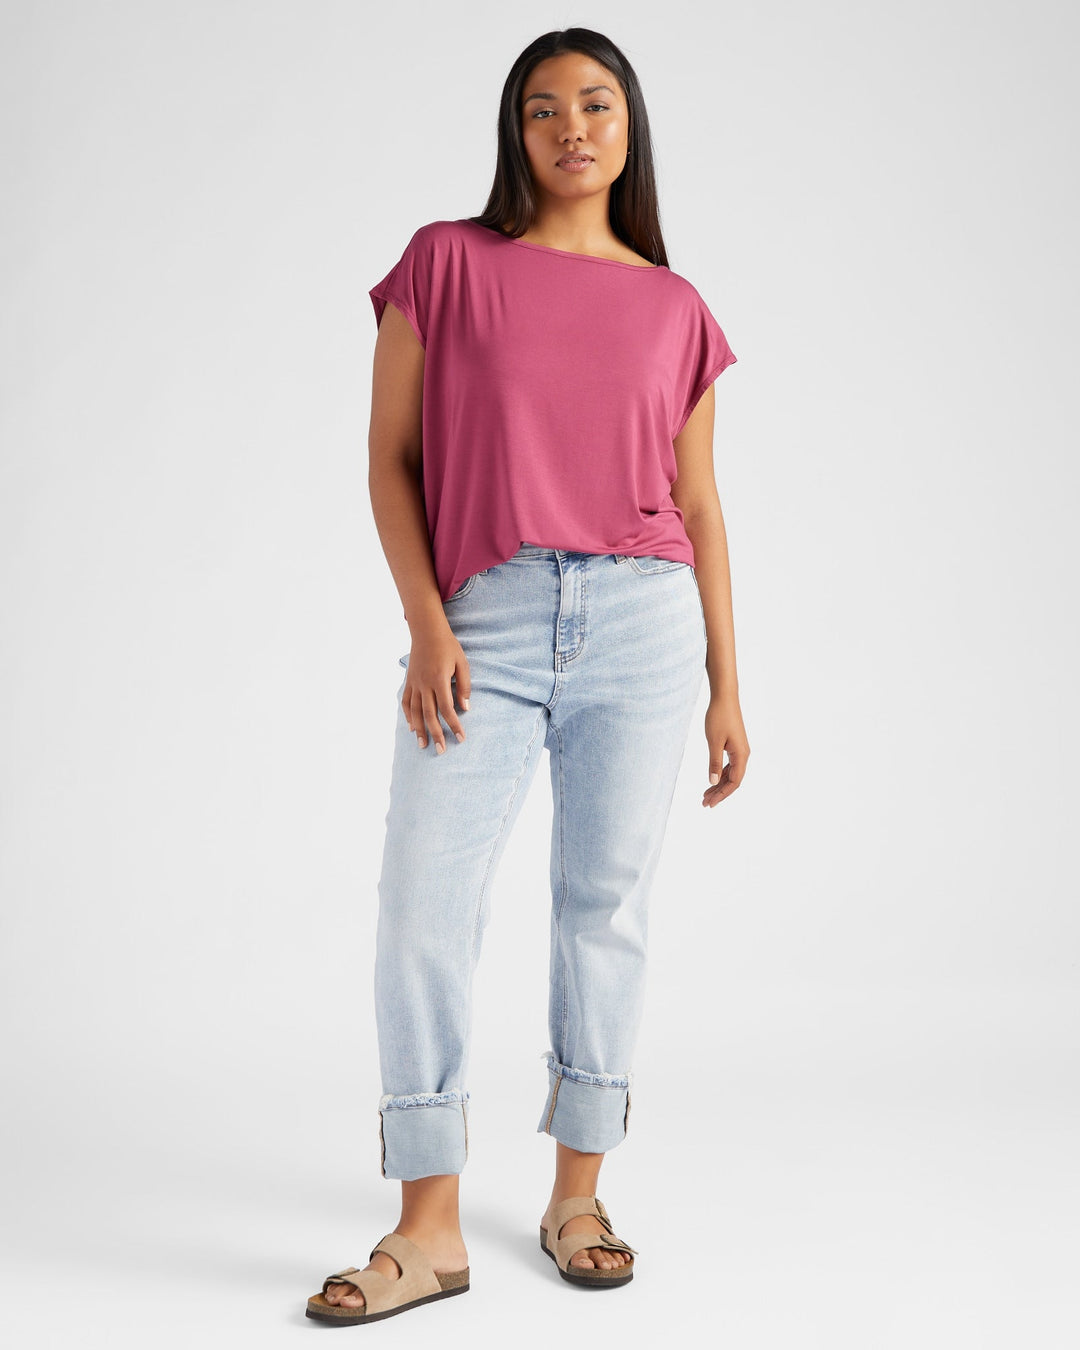 Red Plum $|& 78&SUNNY Brentwood Boat Neck Top - SOF Full Front